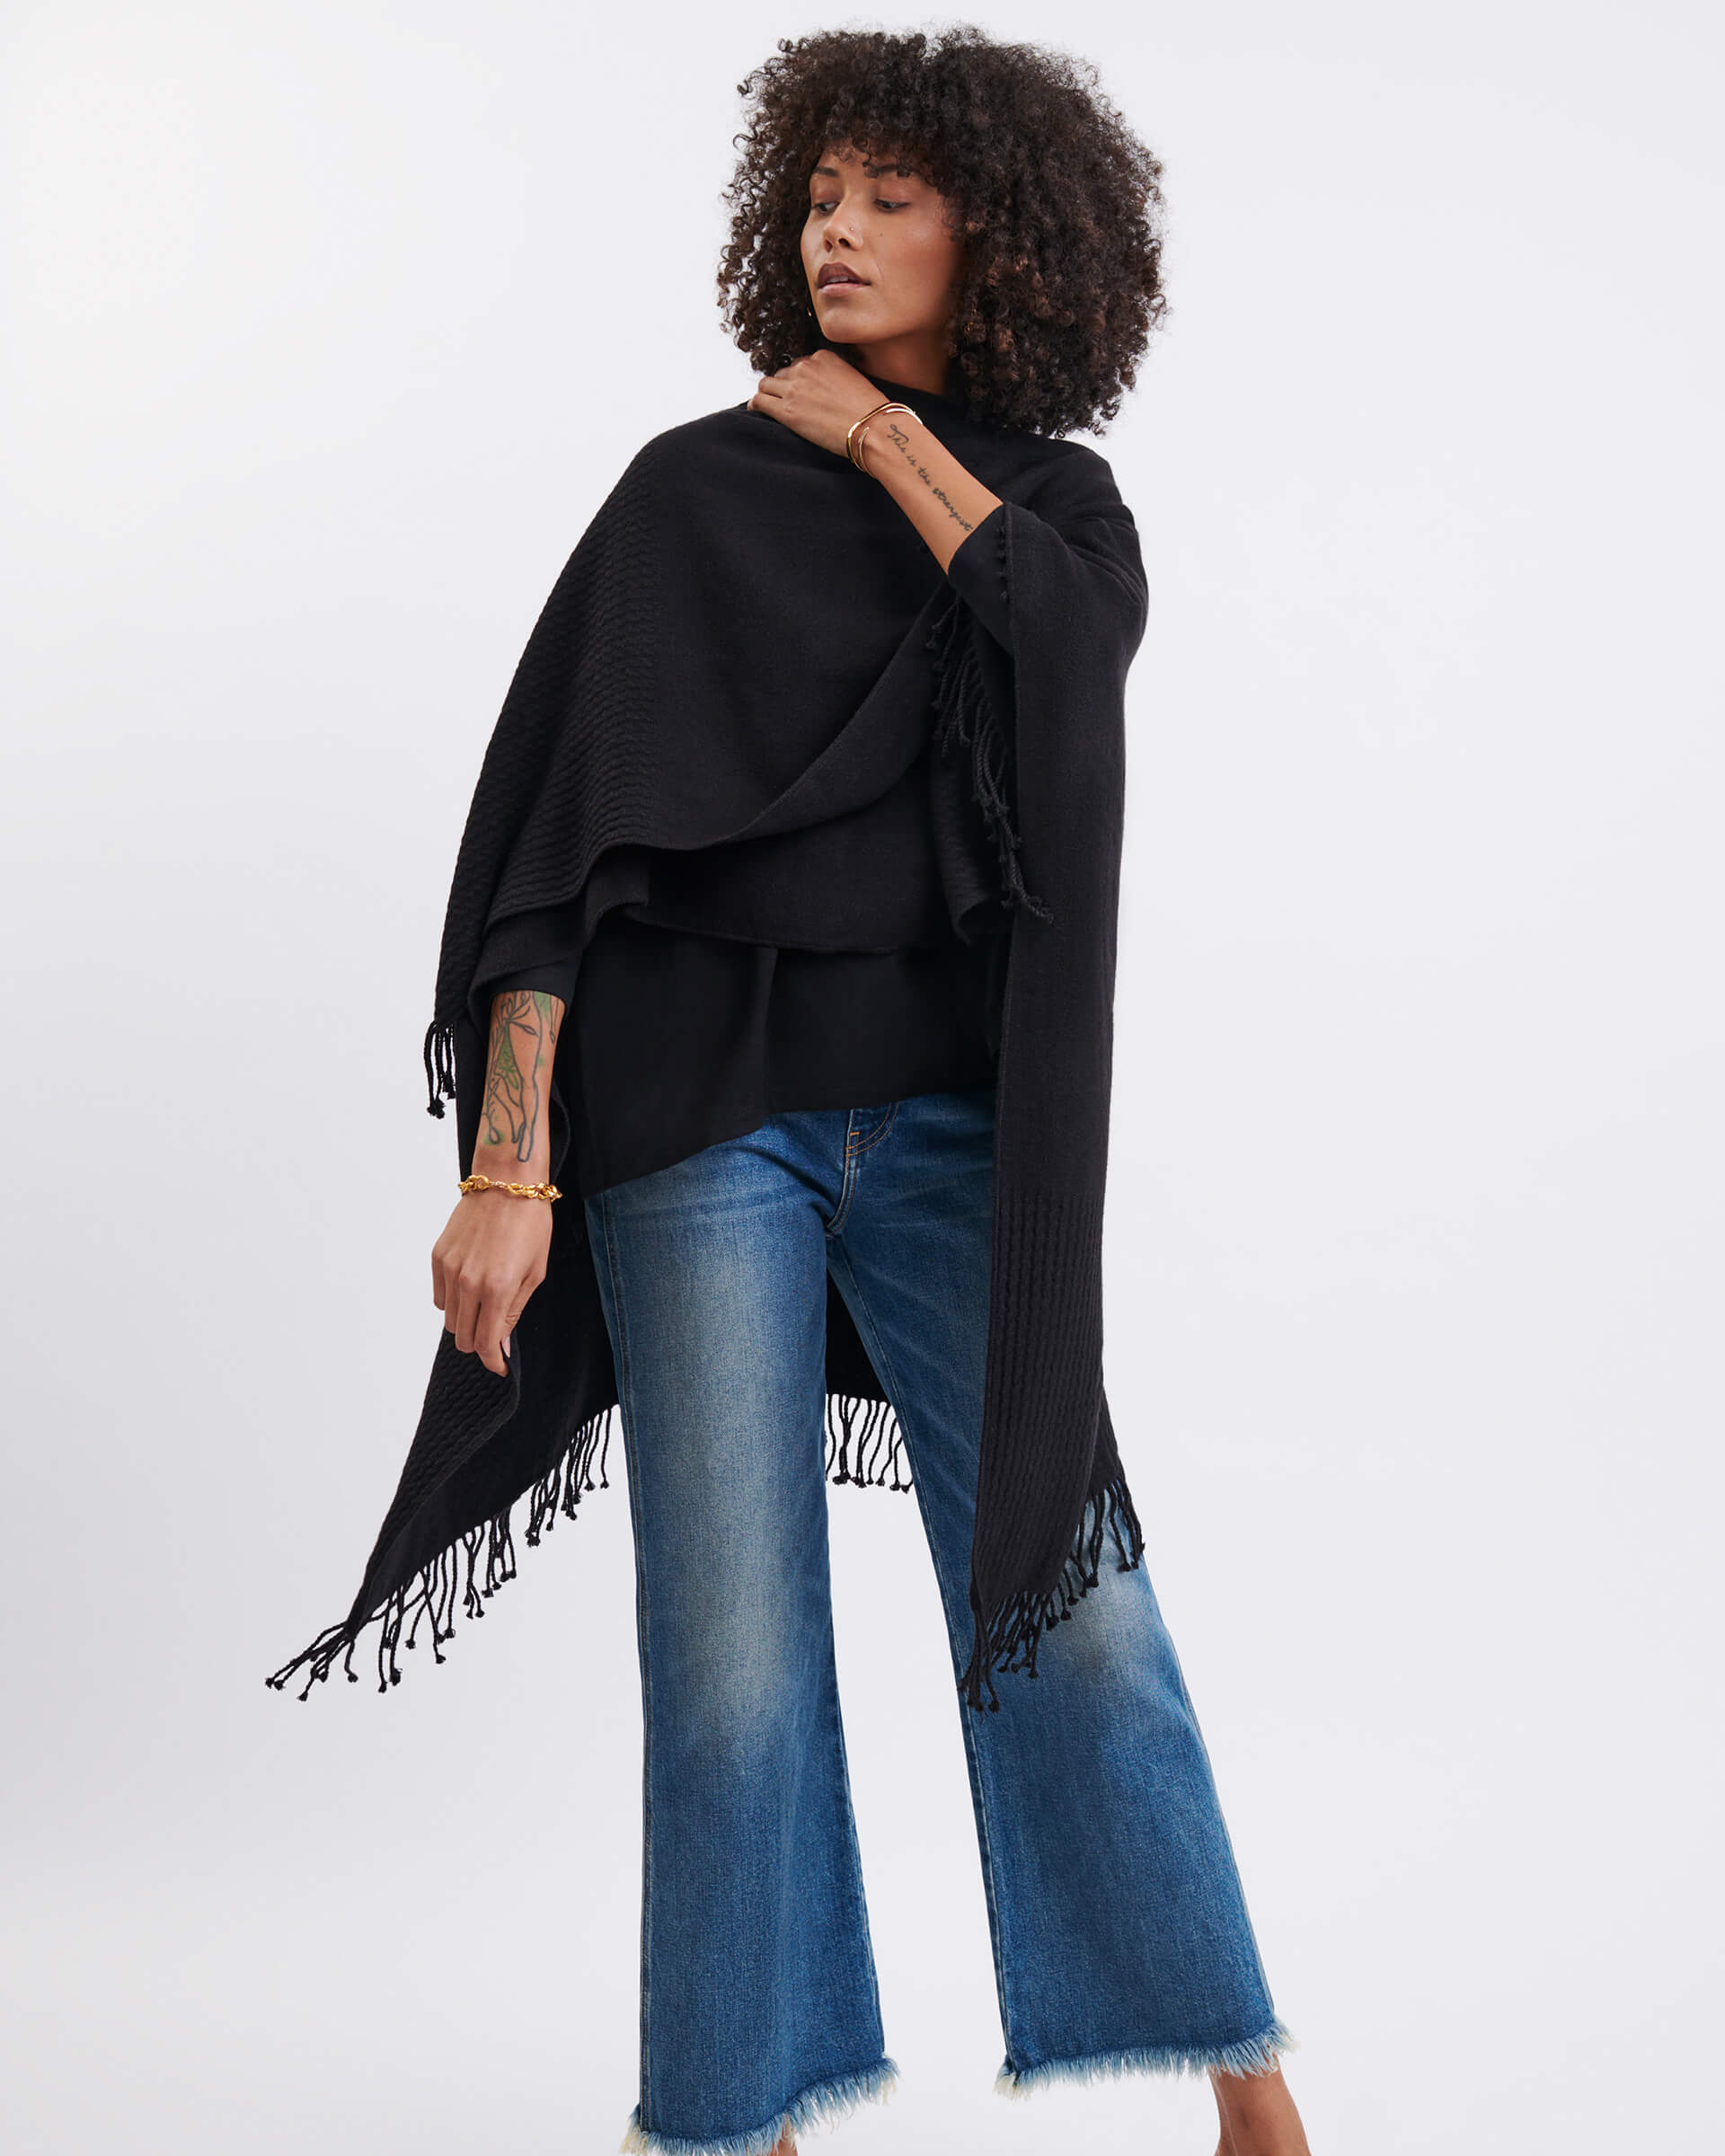 Women's One Size Black Travel Wrap Front View Swing Drape Over Shoulder